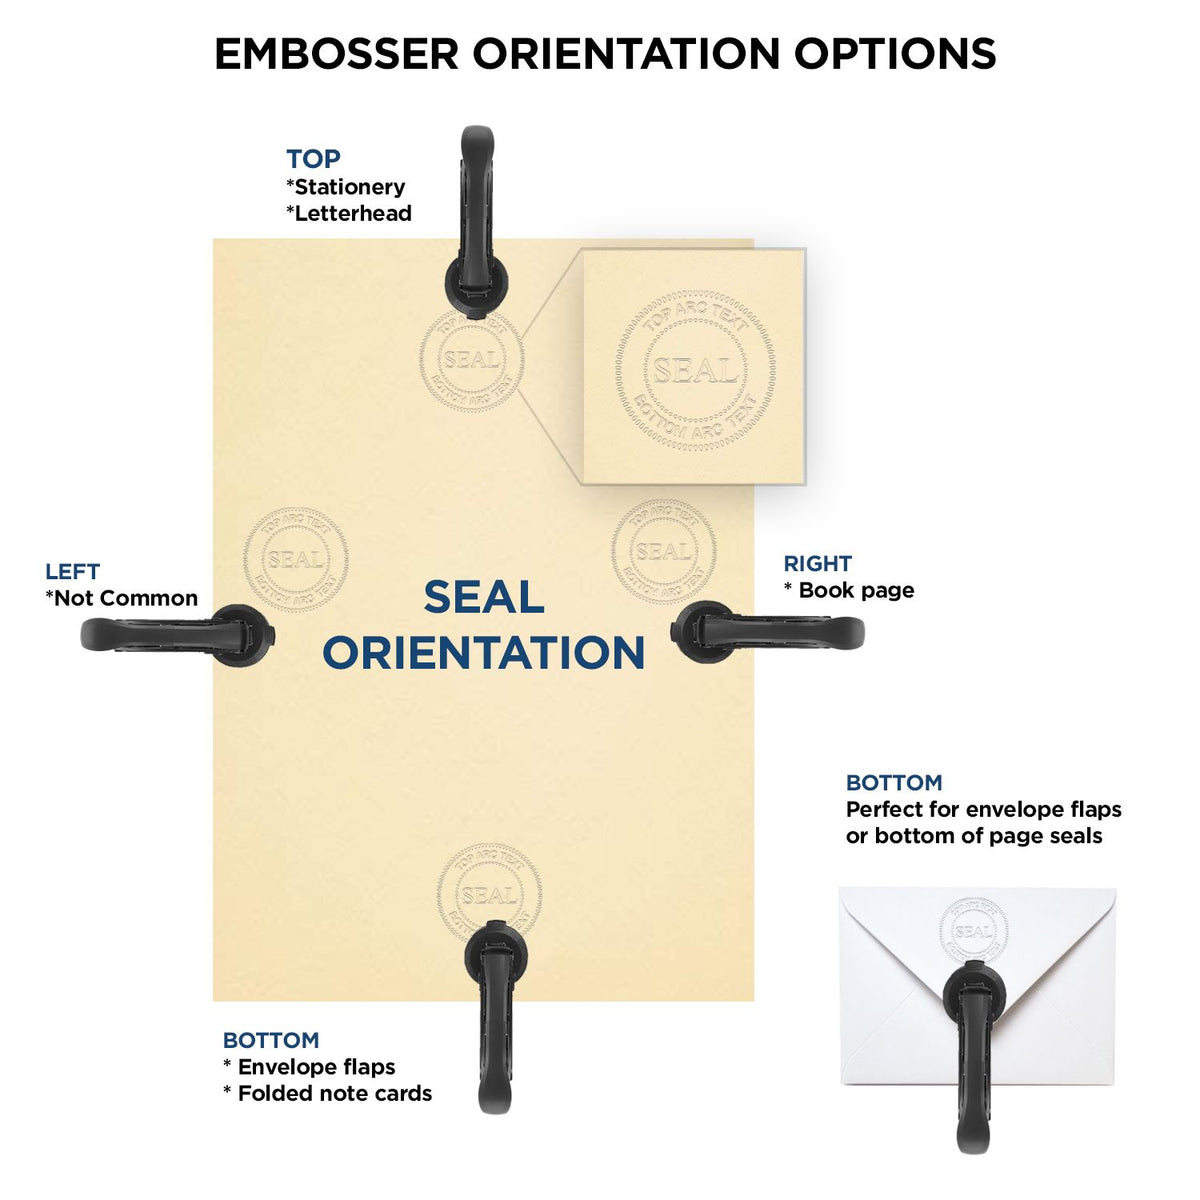 An infographic for the Heavy Duty Cast Iron Connecticut Geologist Seal Embosser showing embosser orientation, this is showing examples of a top, bottom, right and left insert.